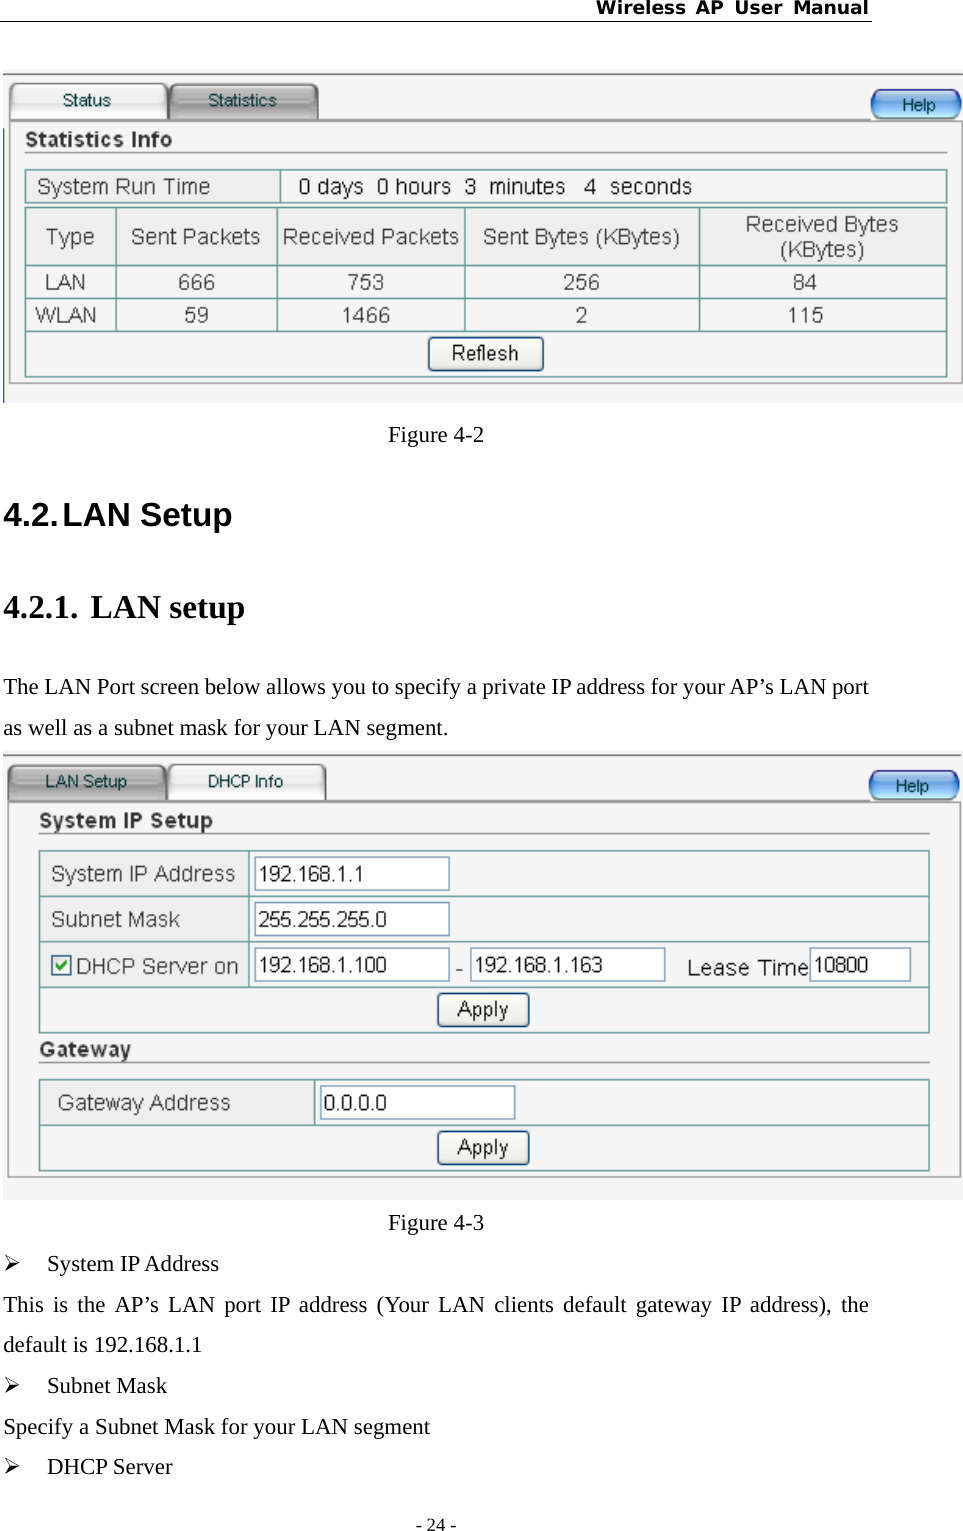 Wireless AP User Manual - 24 -   Figure 4-2 4.2. LAN  Setup   4.2.1. LAN setup The LAN Port screen below allows you to specify a private IP address for your AP’s LAN port as well as a subnet mask for your LAN segment.  Figure 4-3 ¾ System IP Address This is the AP’s LAN port IP address (Your LAN clients default gateway IP address), the default is 192.168.1.1 ¾ Subnet Mask Specify a Subnet Mask for your LAN segment ¾ DHCP Server 